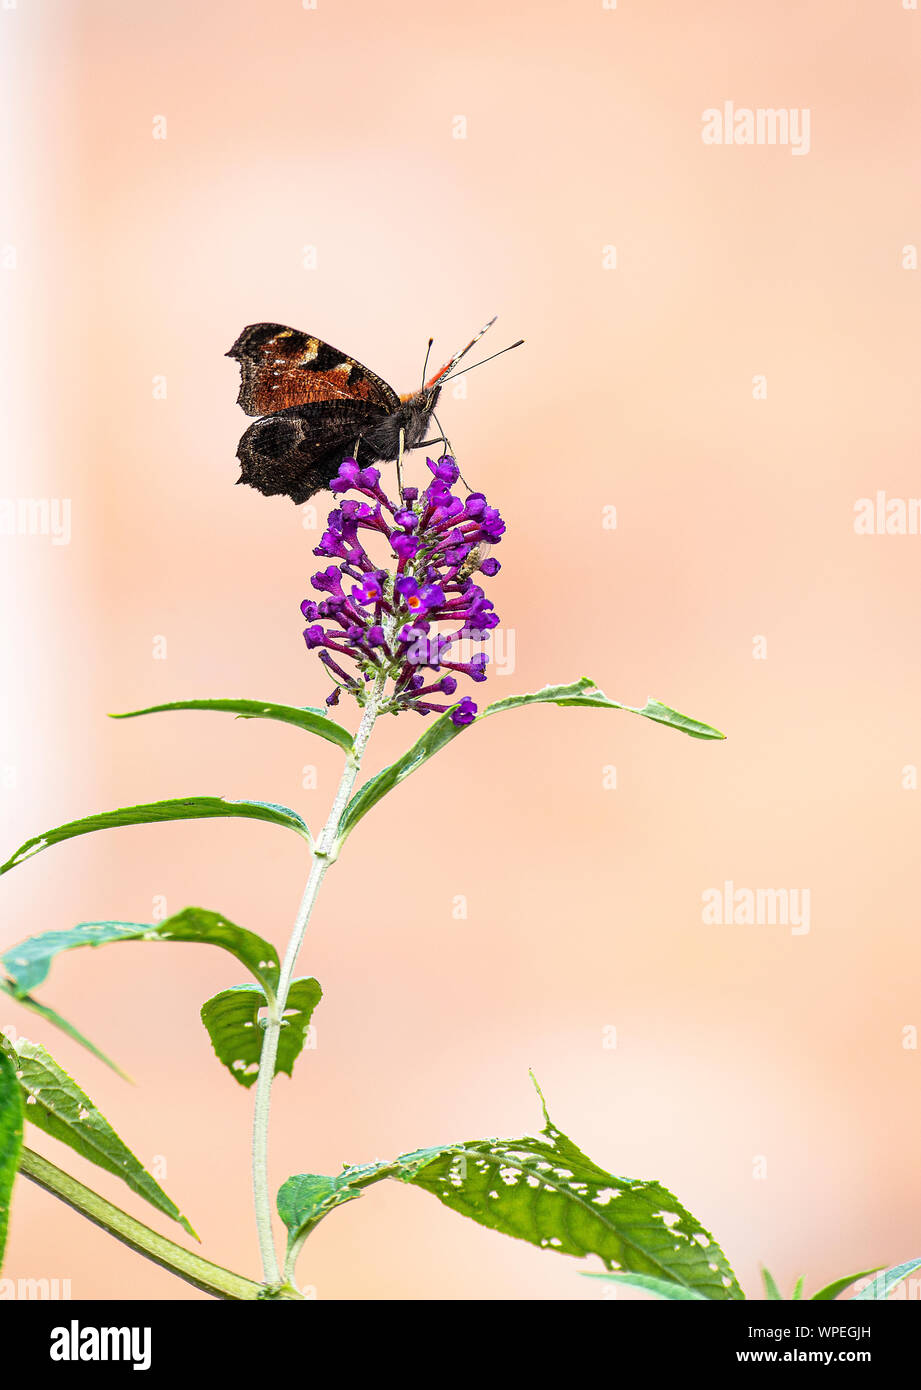 A Beautiful Peacock Butterfly Feeding on Pollen and Nectar on a Purple Buddleja Flower in a Garden in Alsager Cheshire England United Kingdom UK Stock Photo